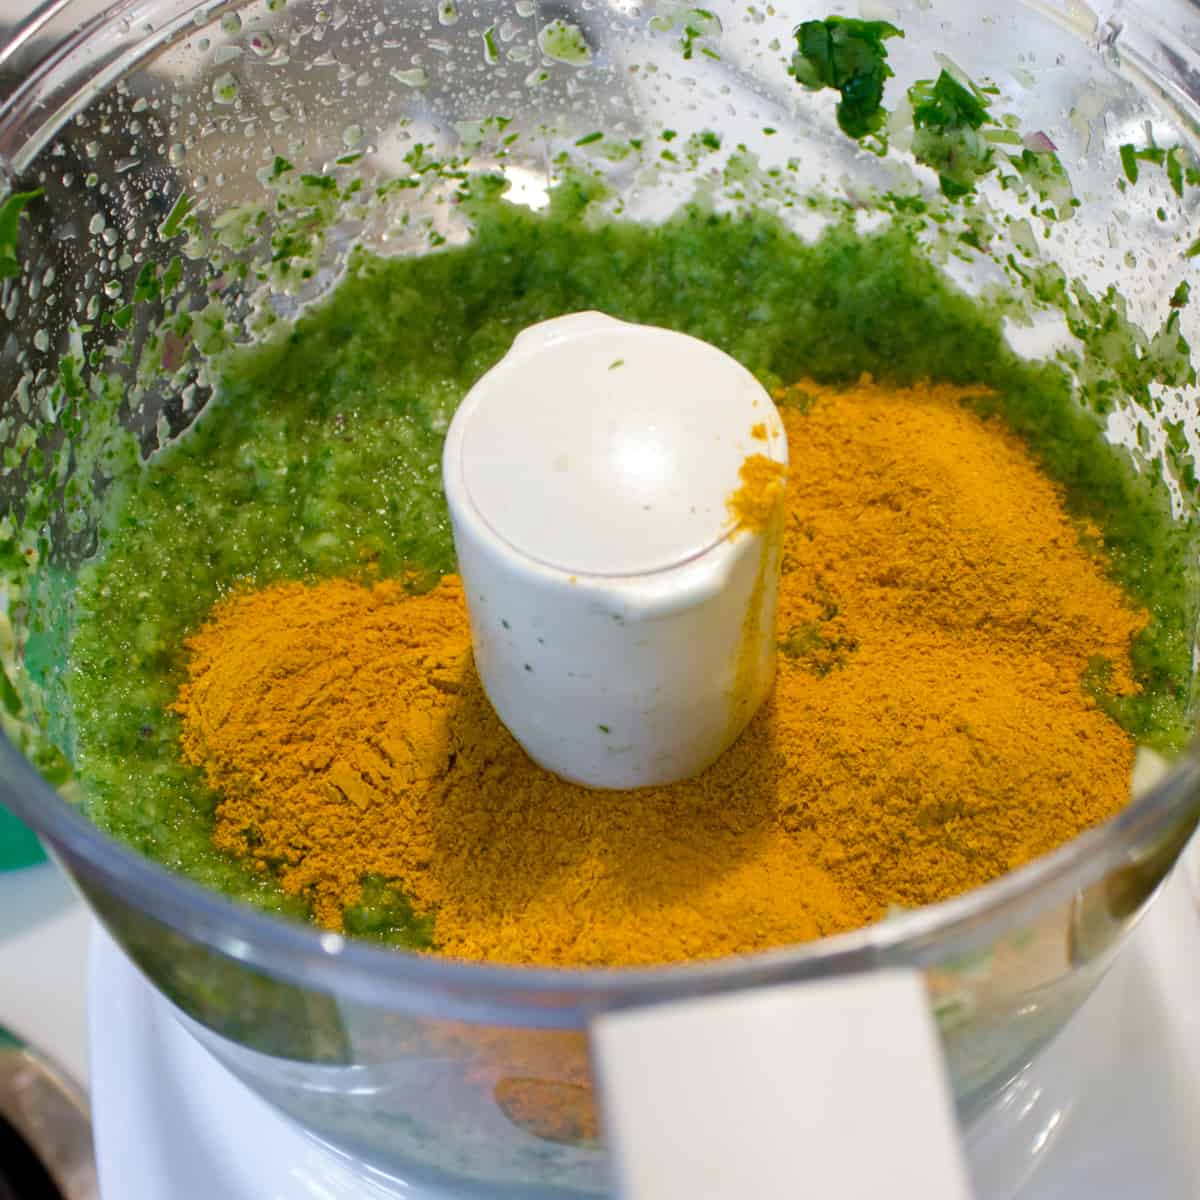 Curry powder dumped into the food processor with blended paste.